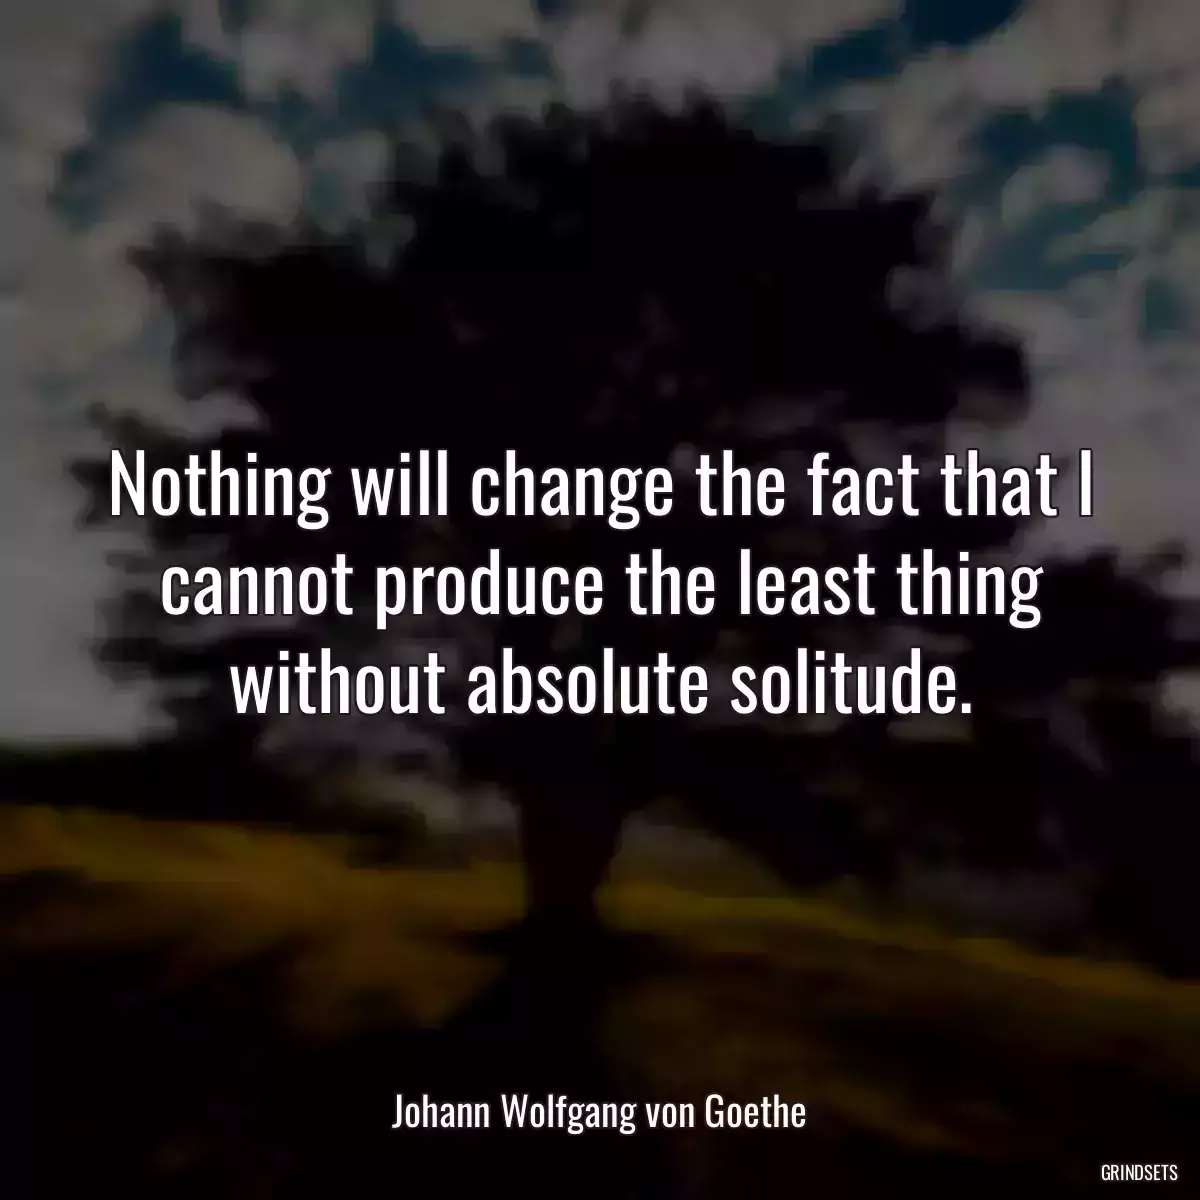 Nothing will change the fact that I cannot produce the least thing without absolute solitude.